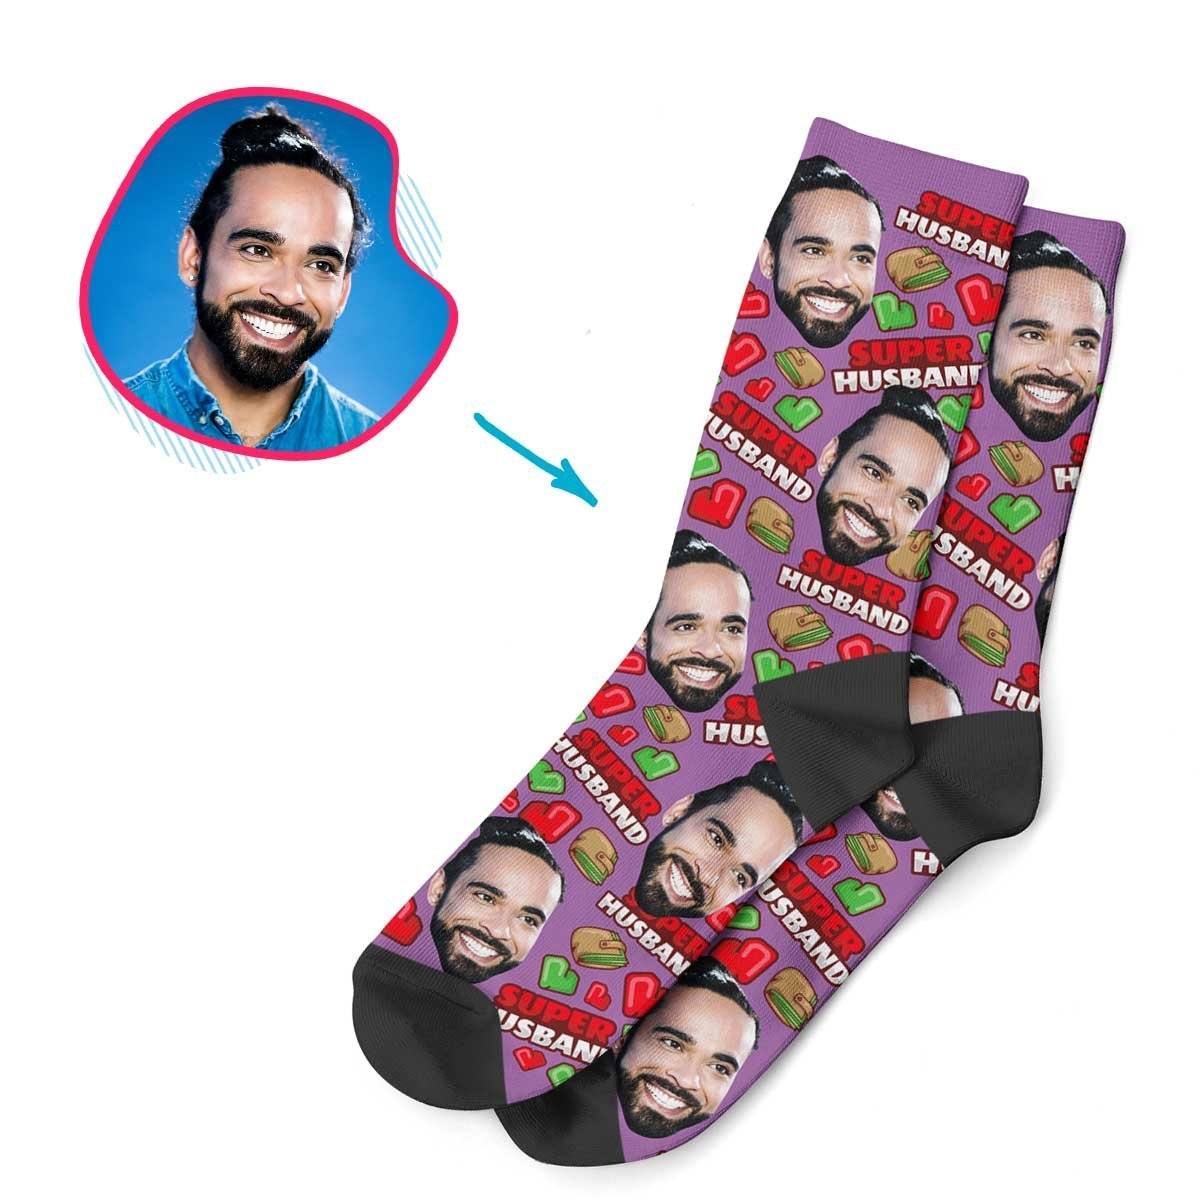 Purple Husband personalized socks with photo of face printed on them